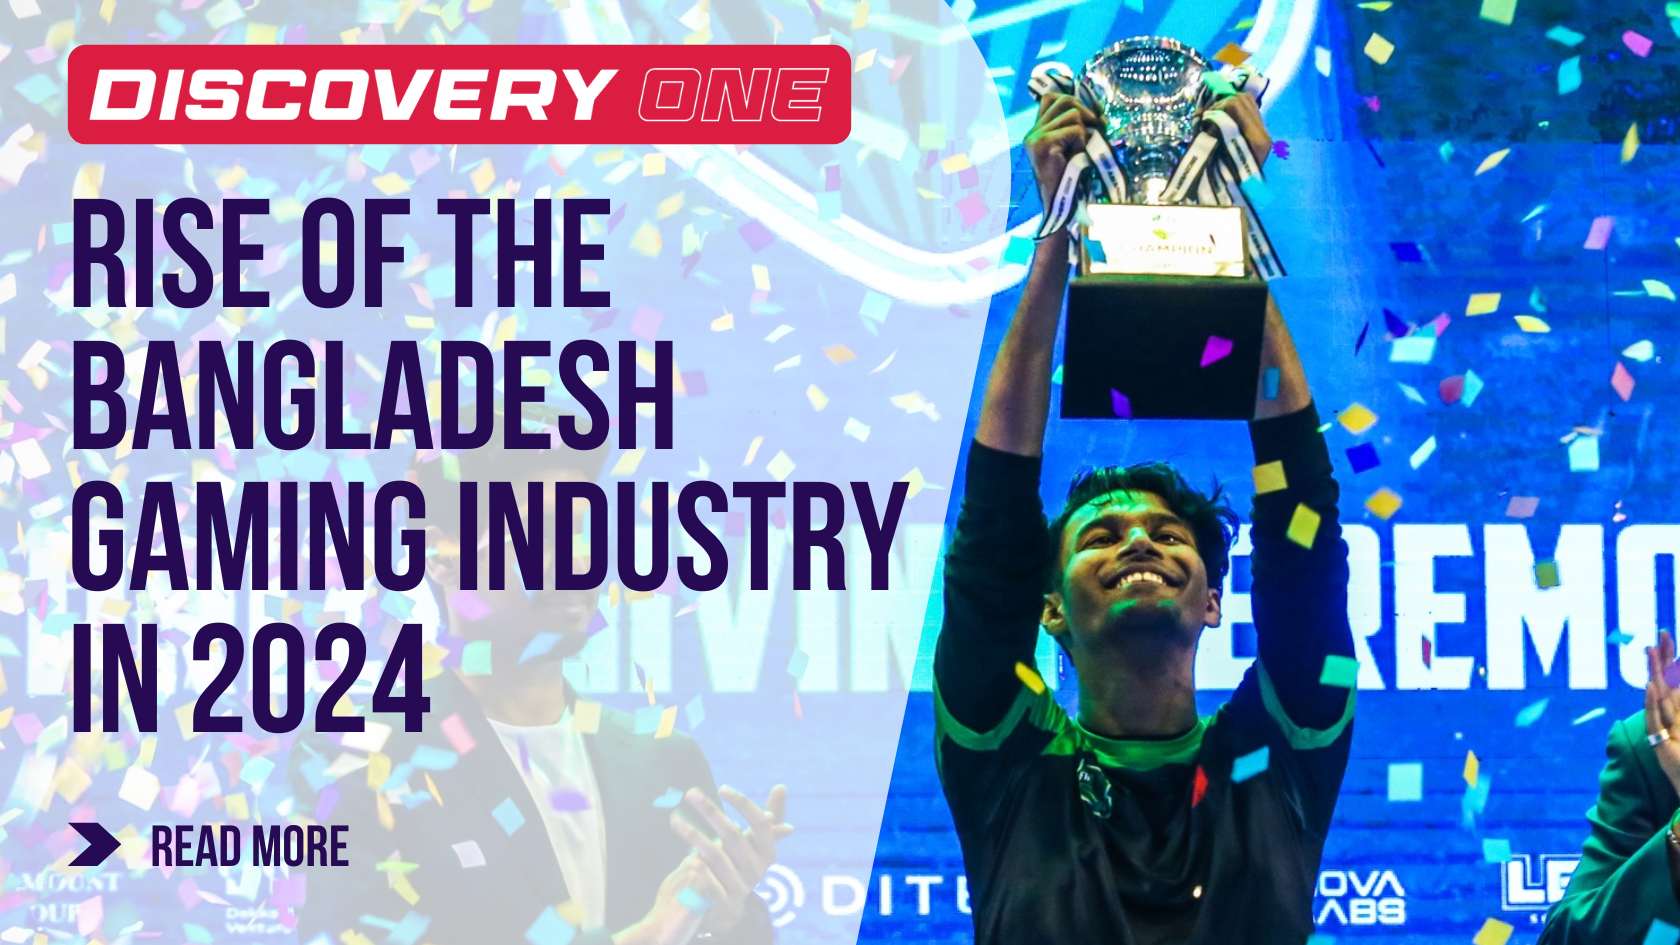 Rise of the Bangladesh Gaming Industry in 2024